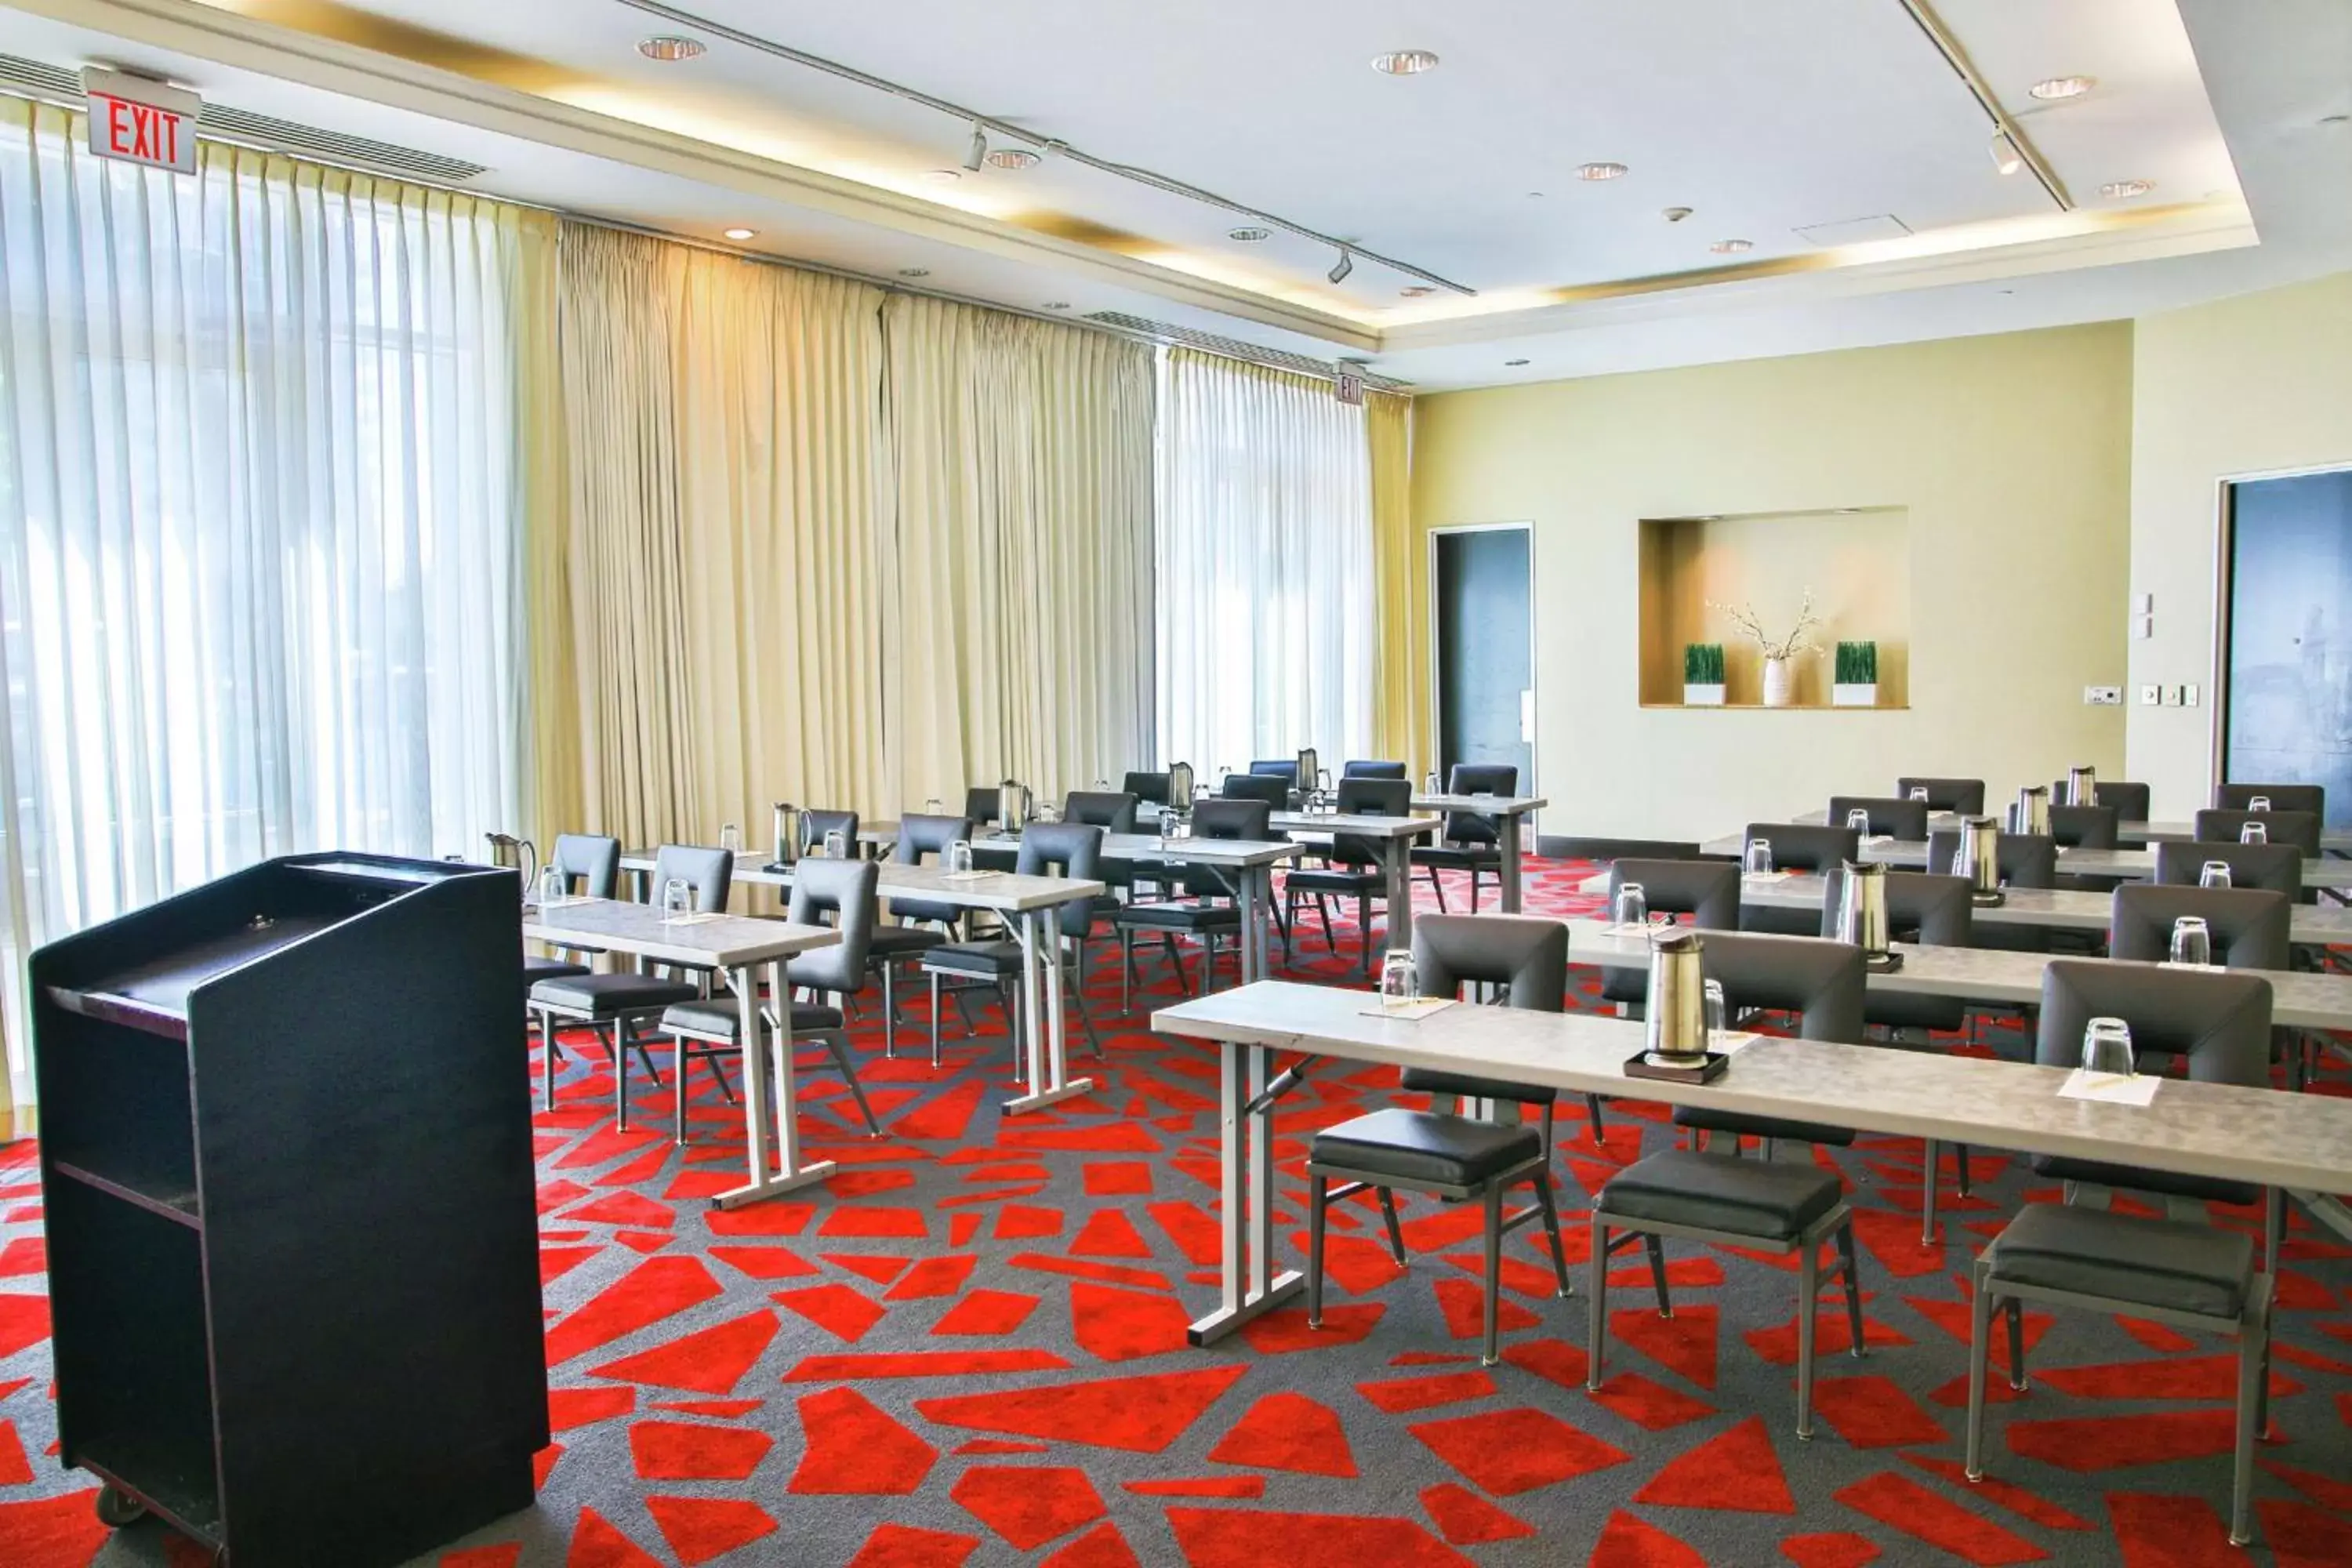 Meeting/conference room in GALLERYone - a DoubleTree Suites by Hilton Hotel